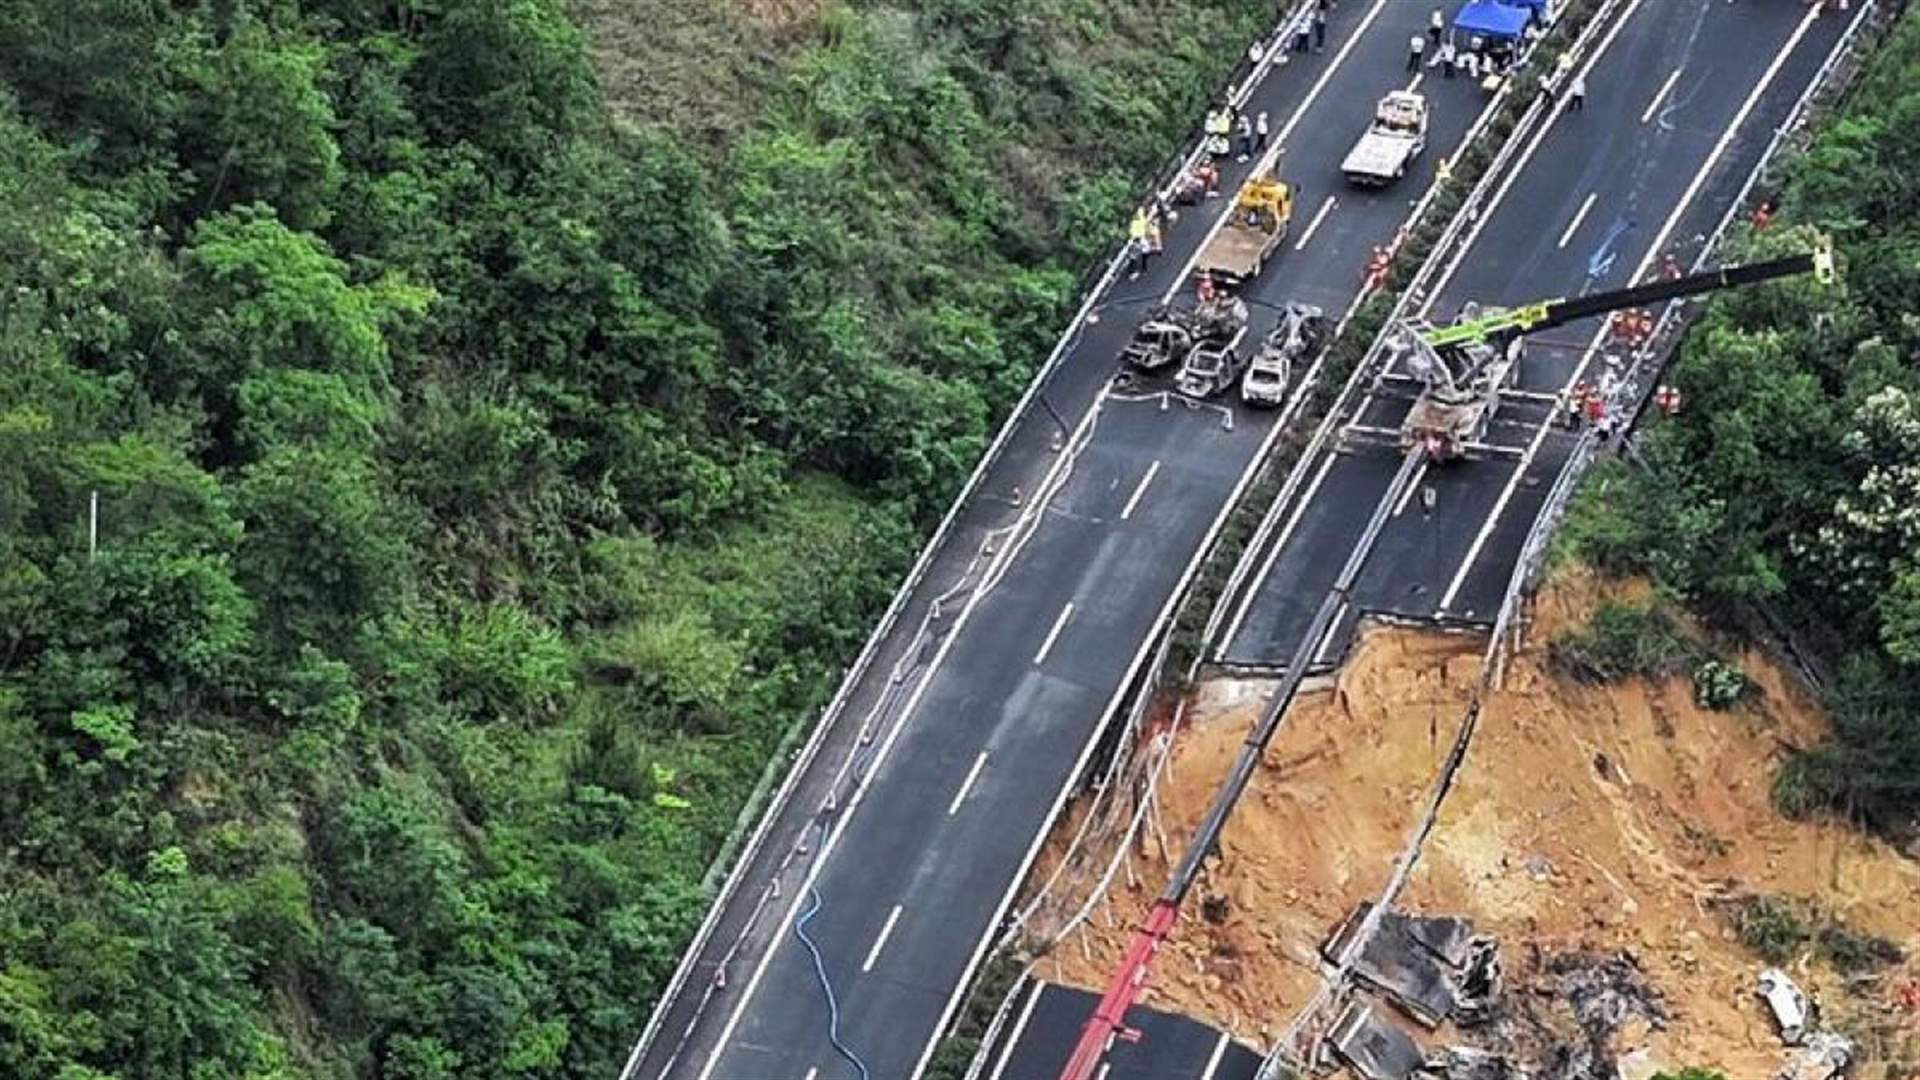 Road collapse in China kills 36, says state media